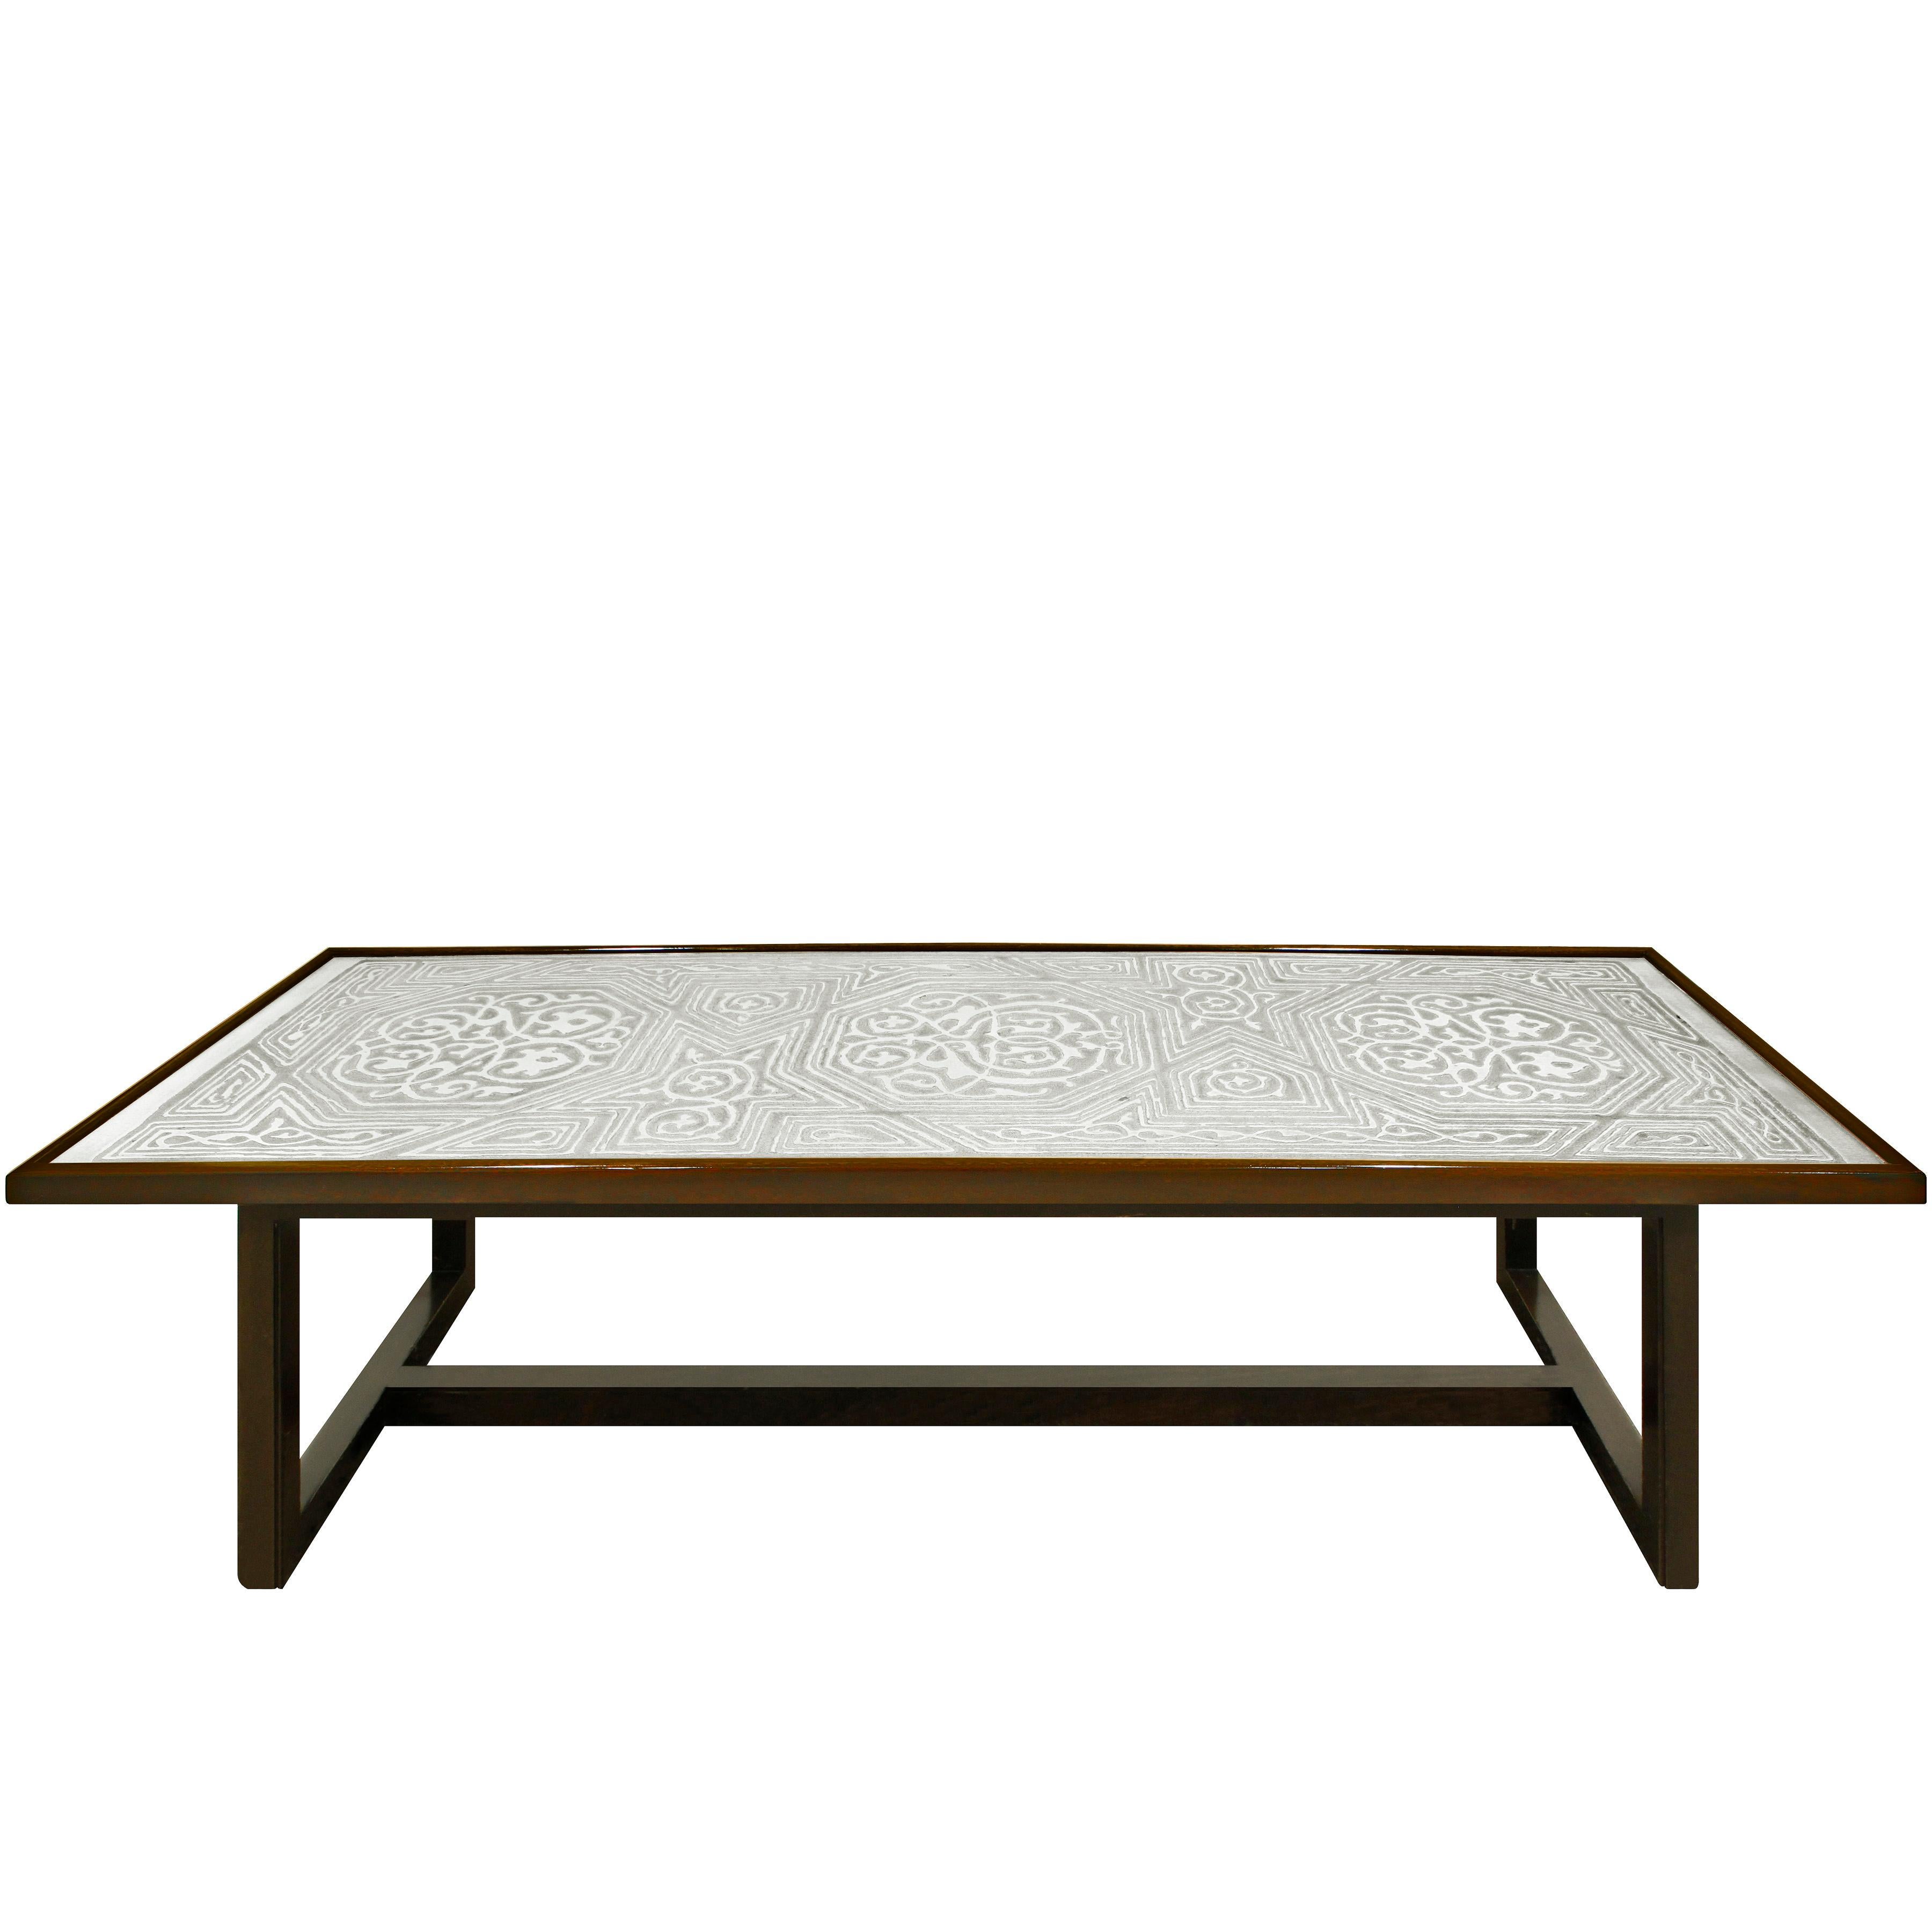 Rare and exceptional coffee table No. 1322 with etched metal top and mahogany base by Harvey Probber, American 1950s. This coffee table was only in production for a short time. The etched metal top was made by artist Arpad Rosti with whom Probber